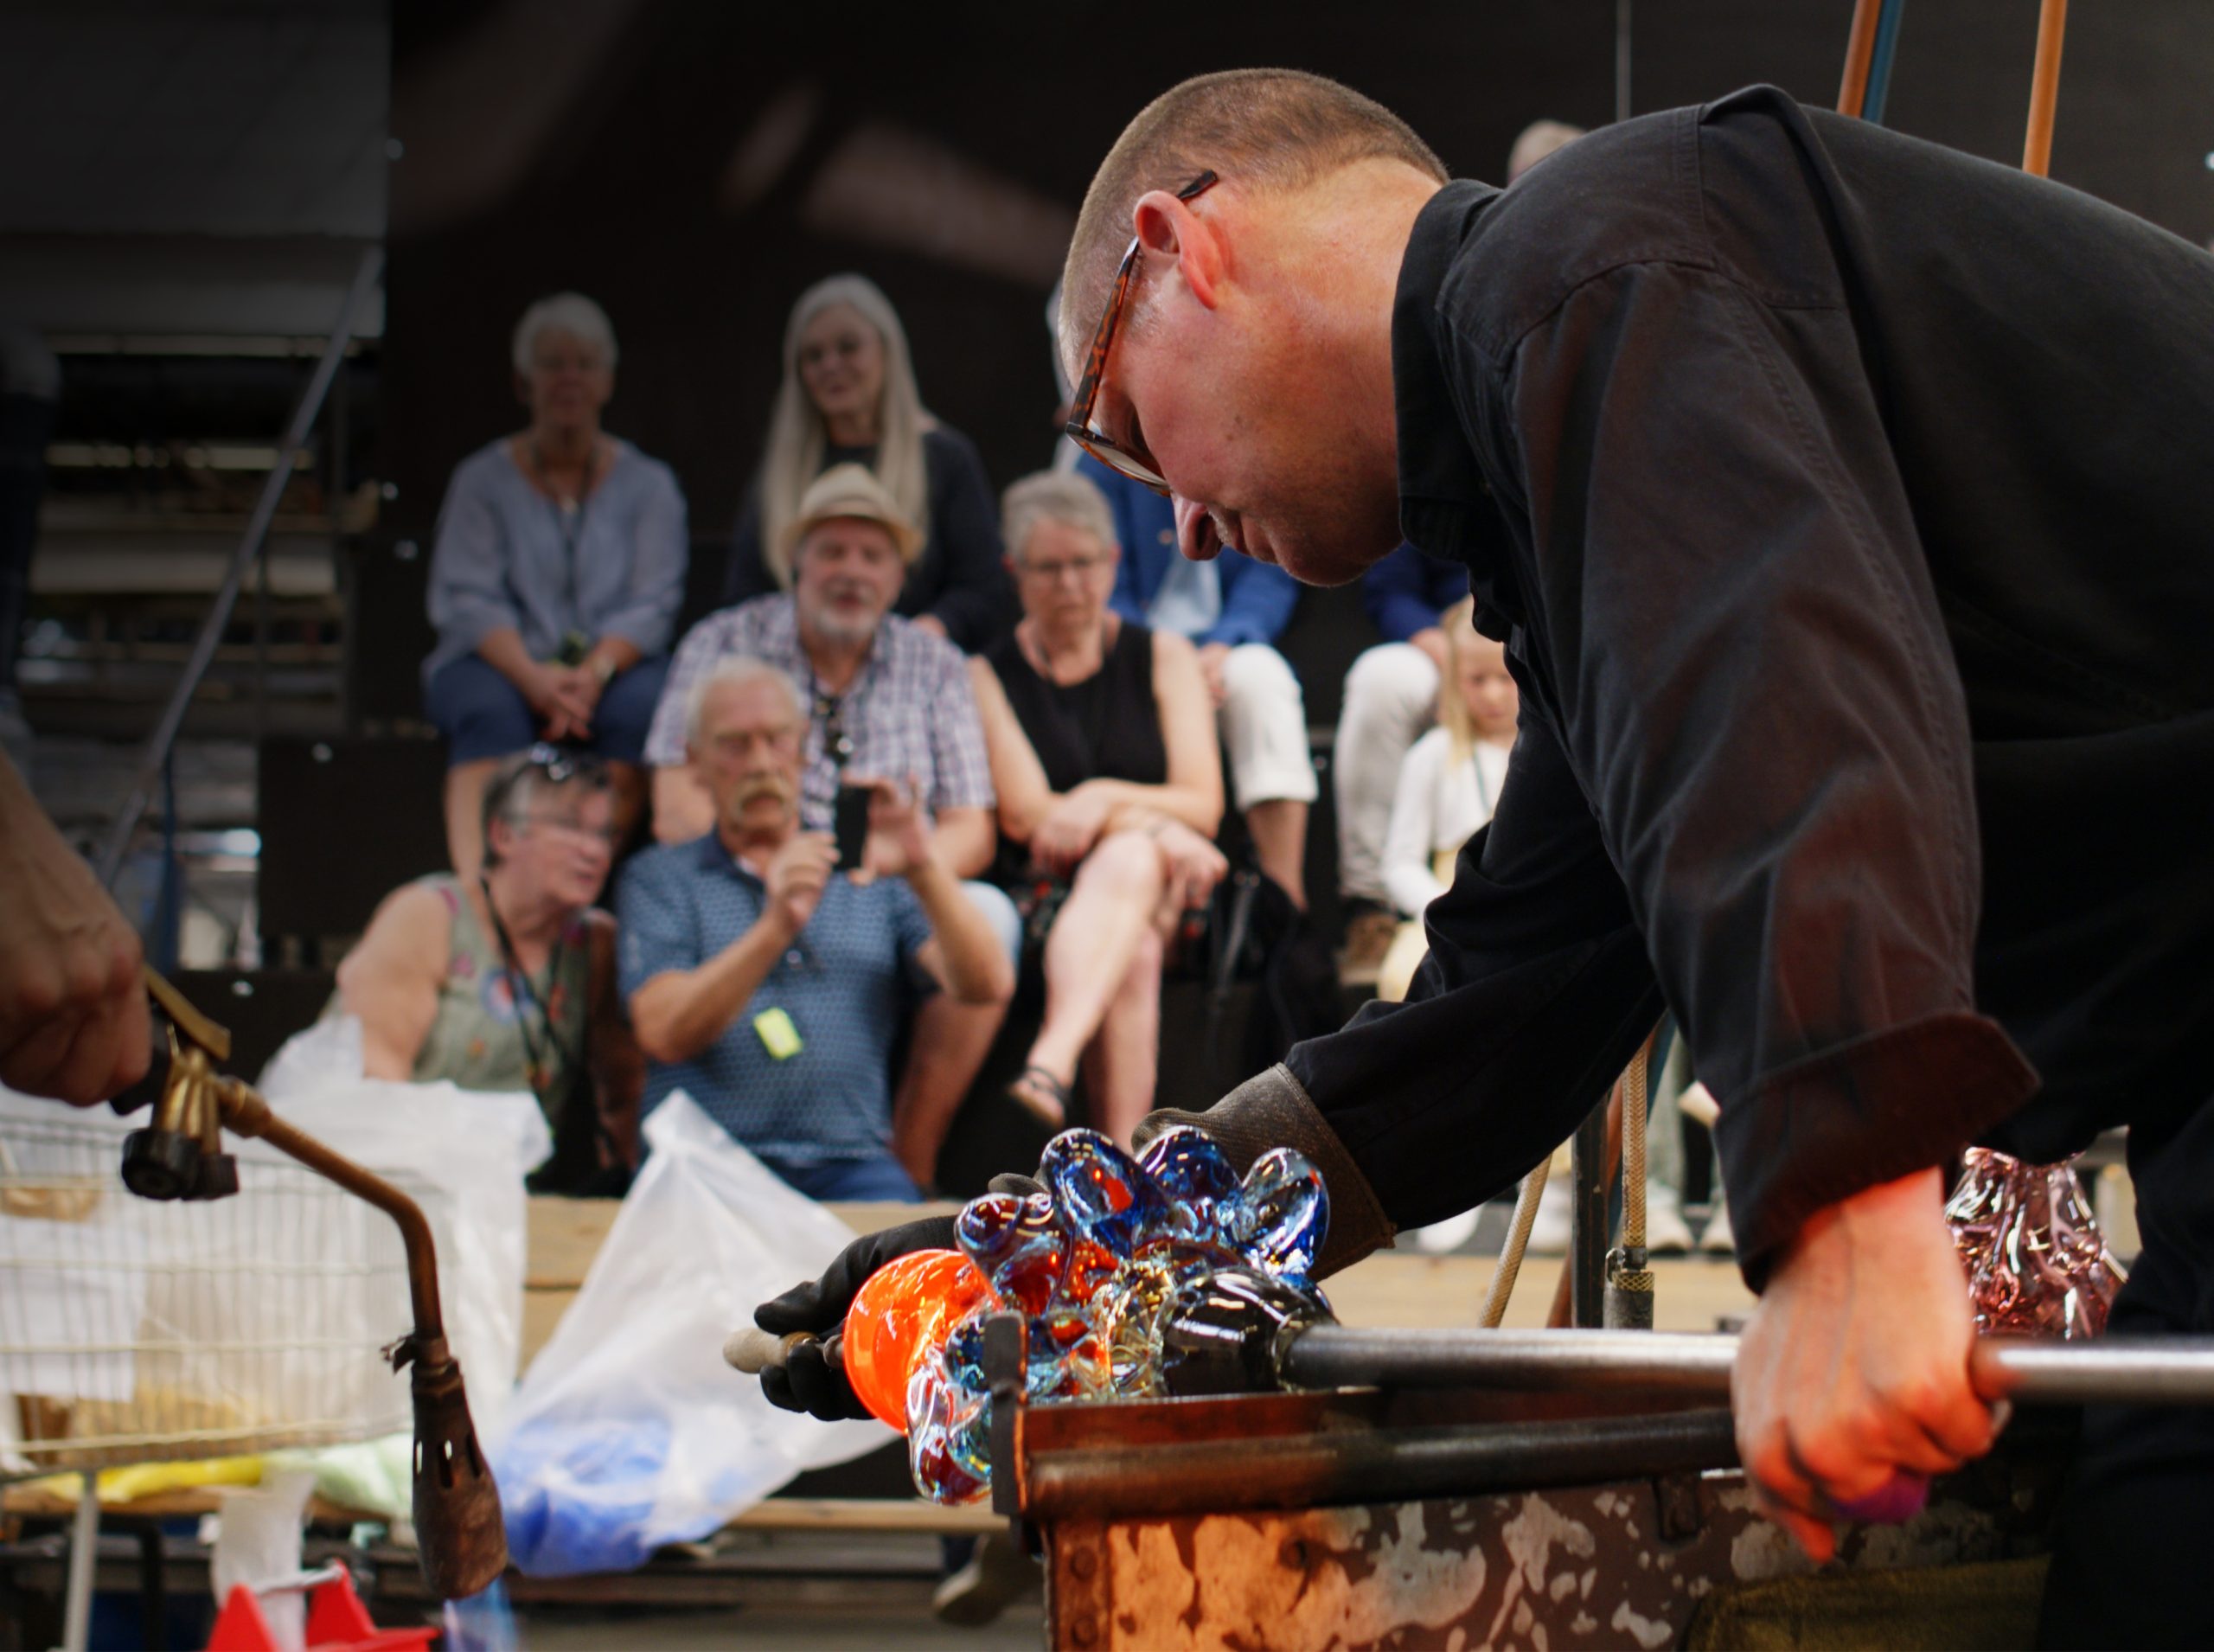 Glassblowing with an audience in the Kingdom of Glass